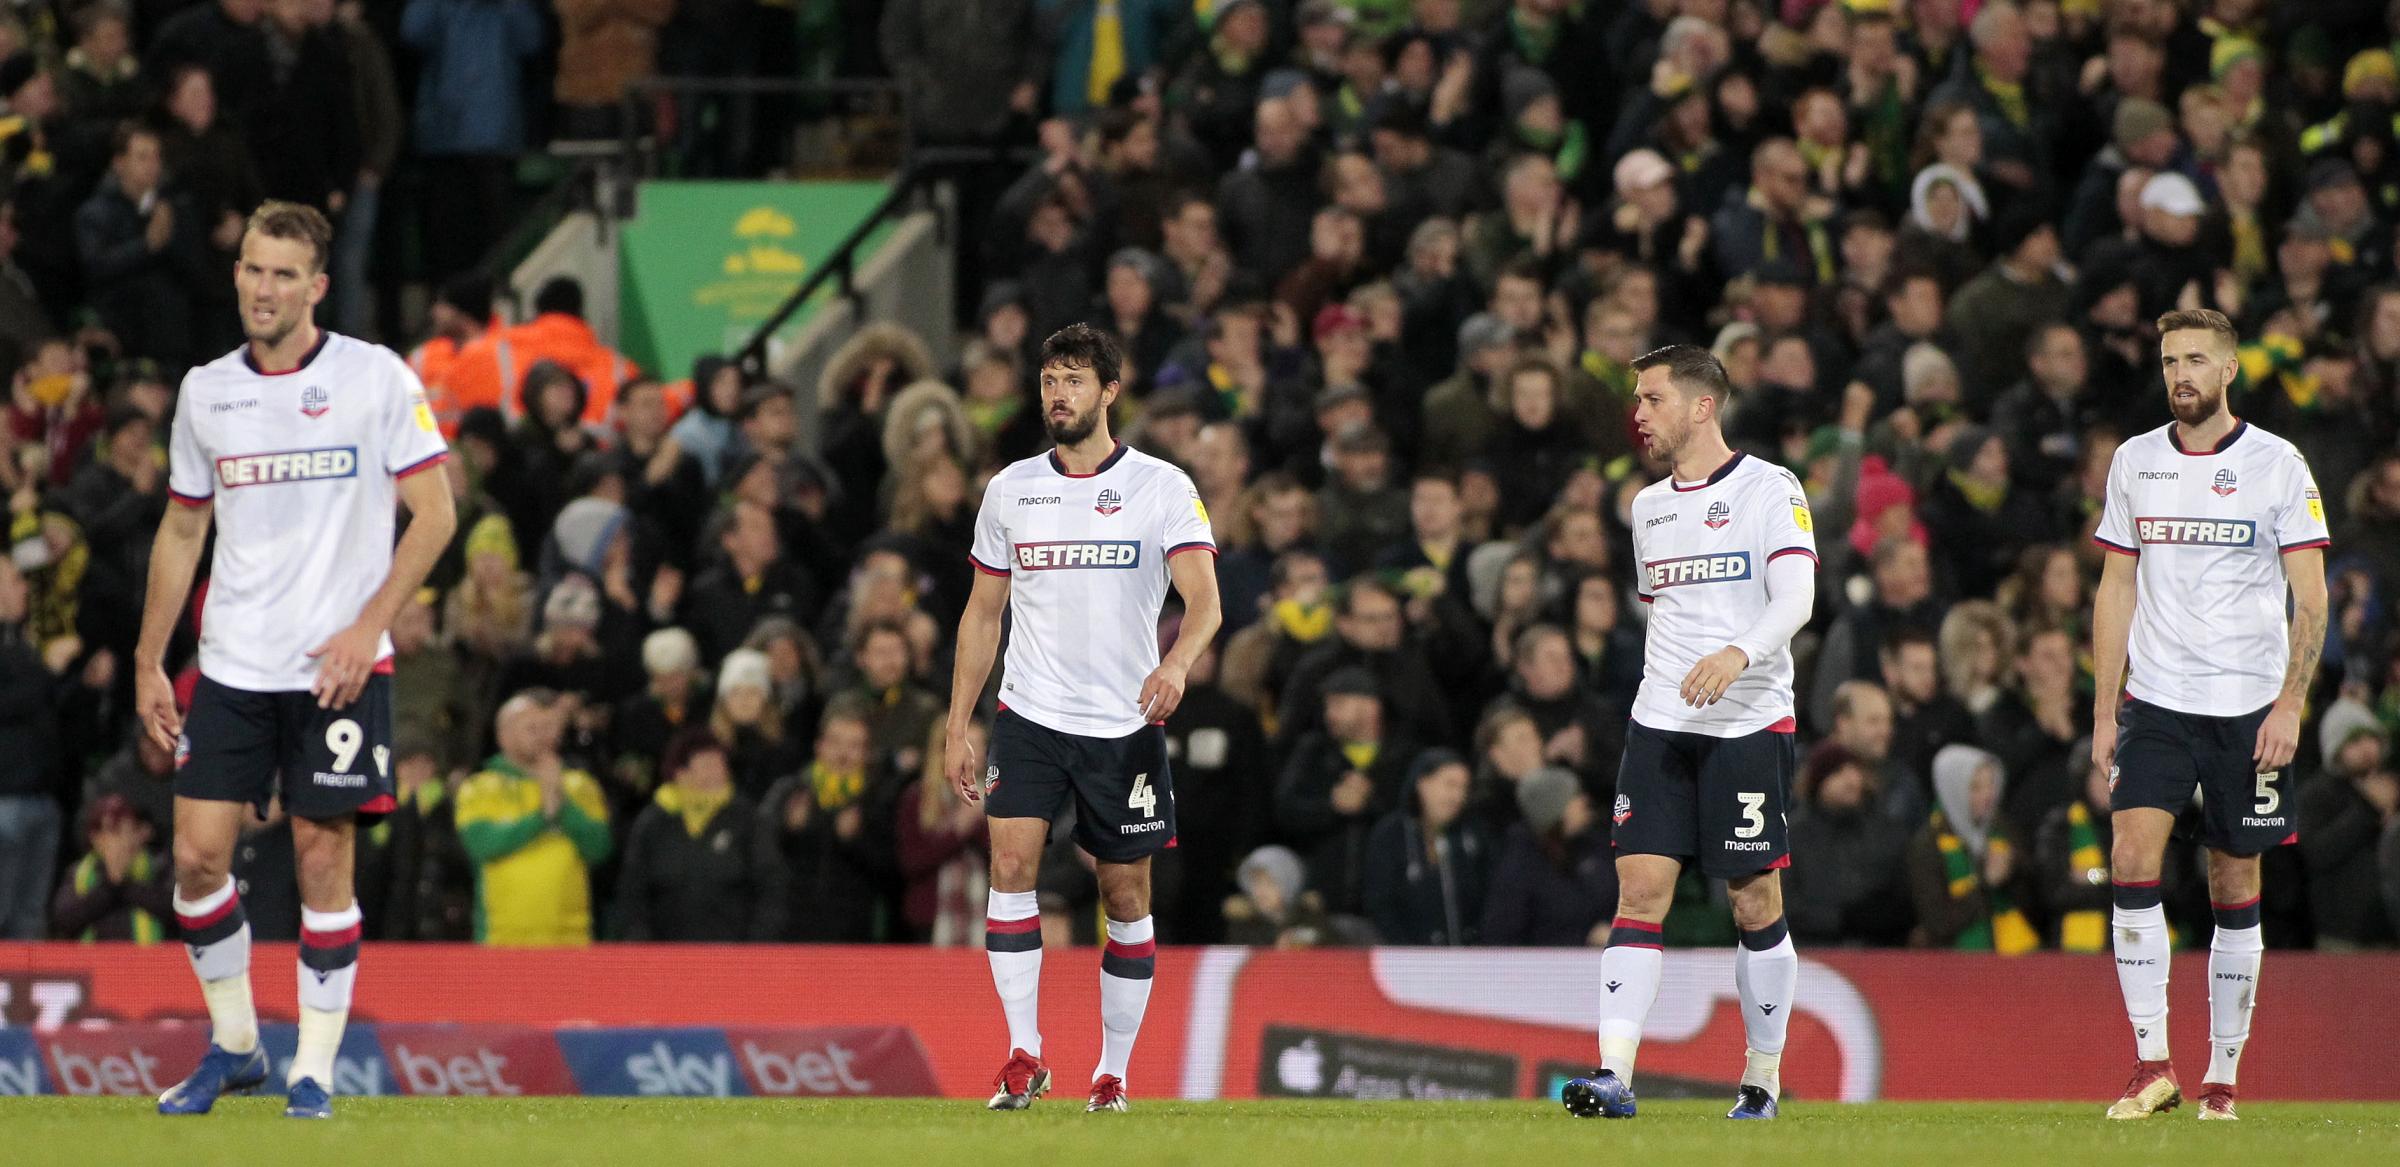 PICTURES: All the action from Bolton Wanderers brave defeat away at Norwich